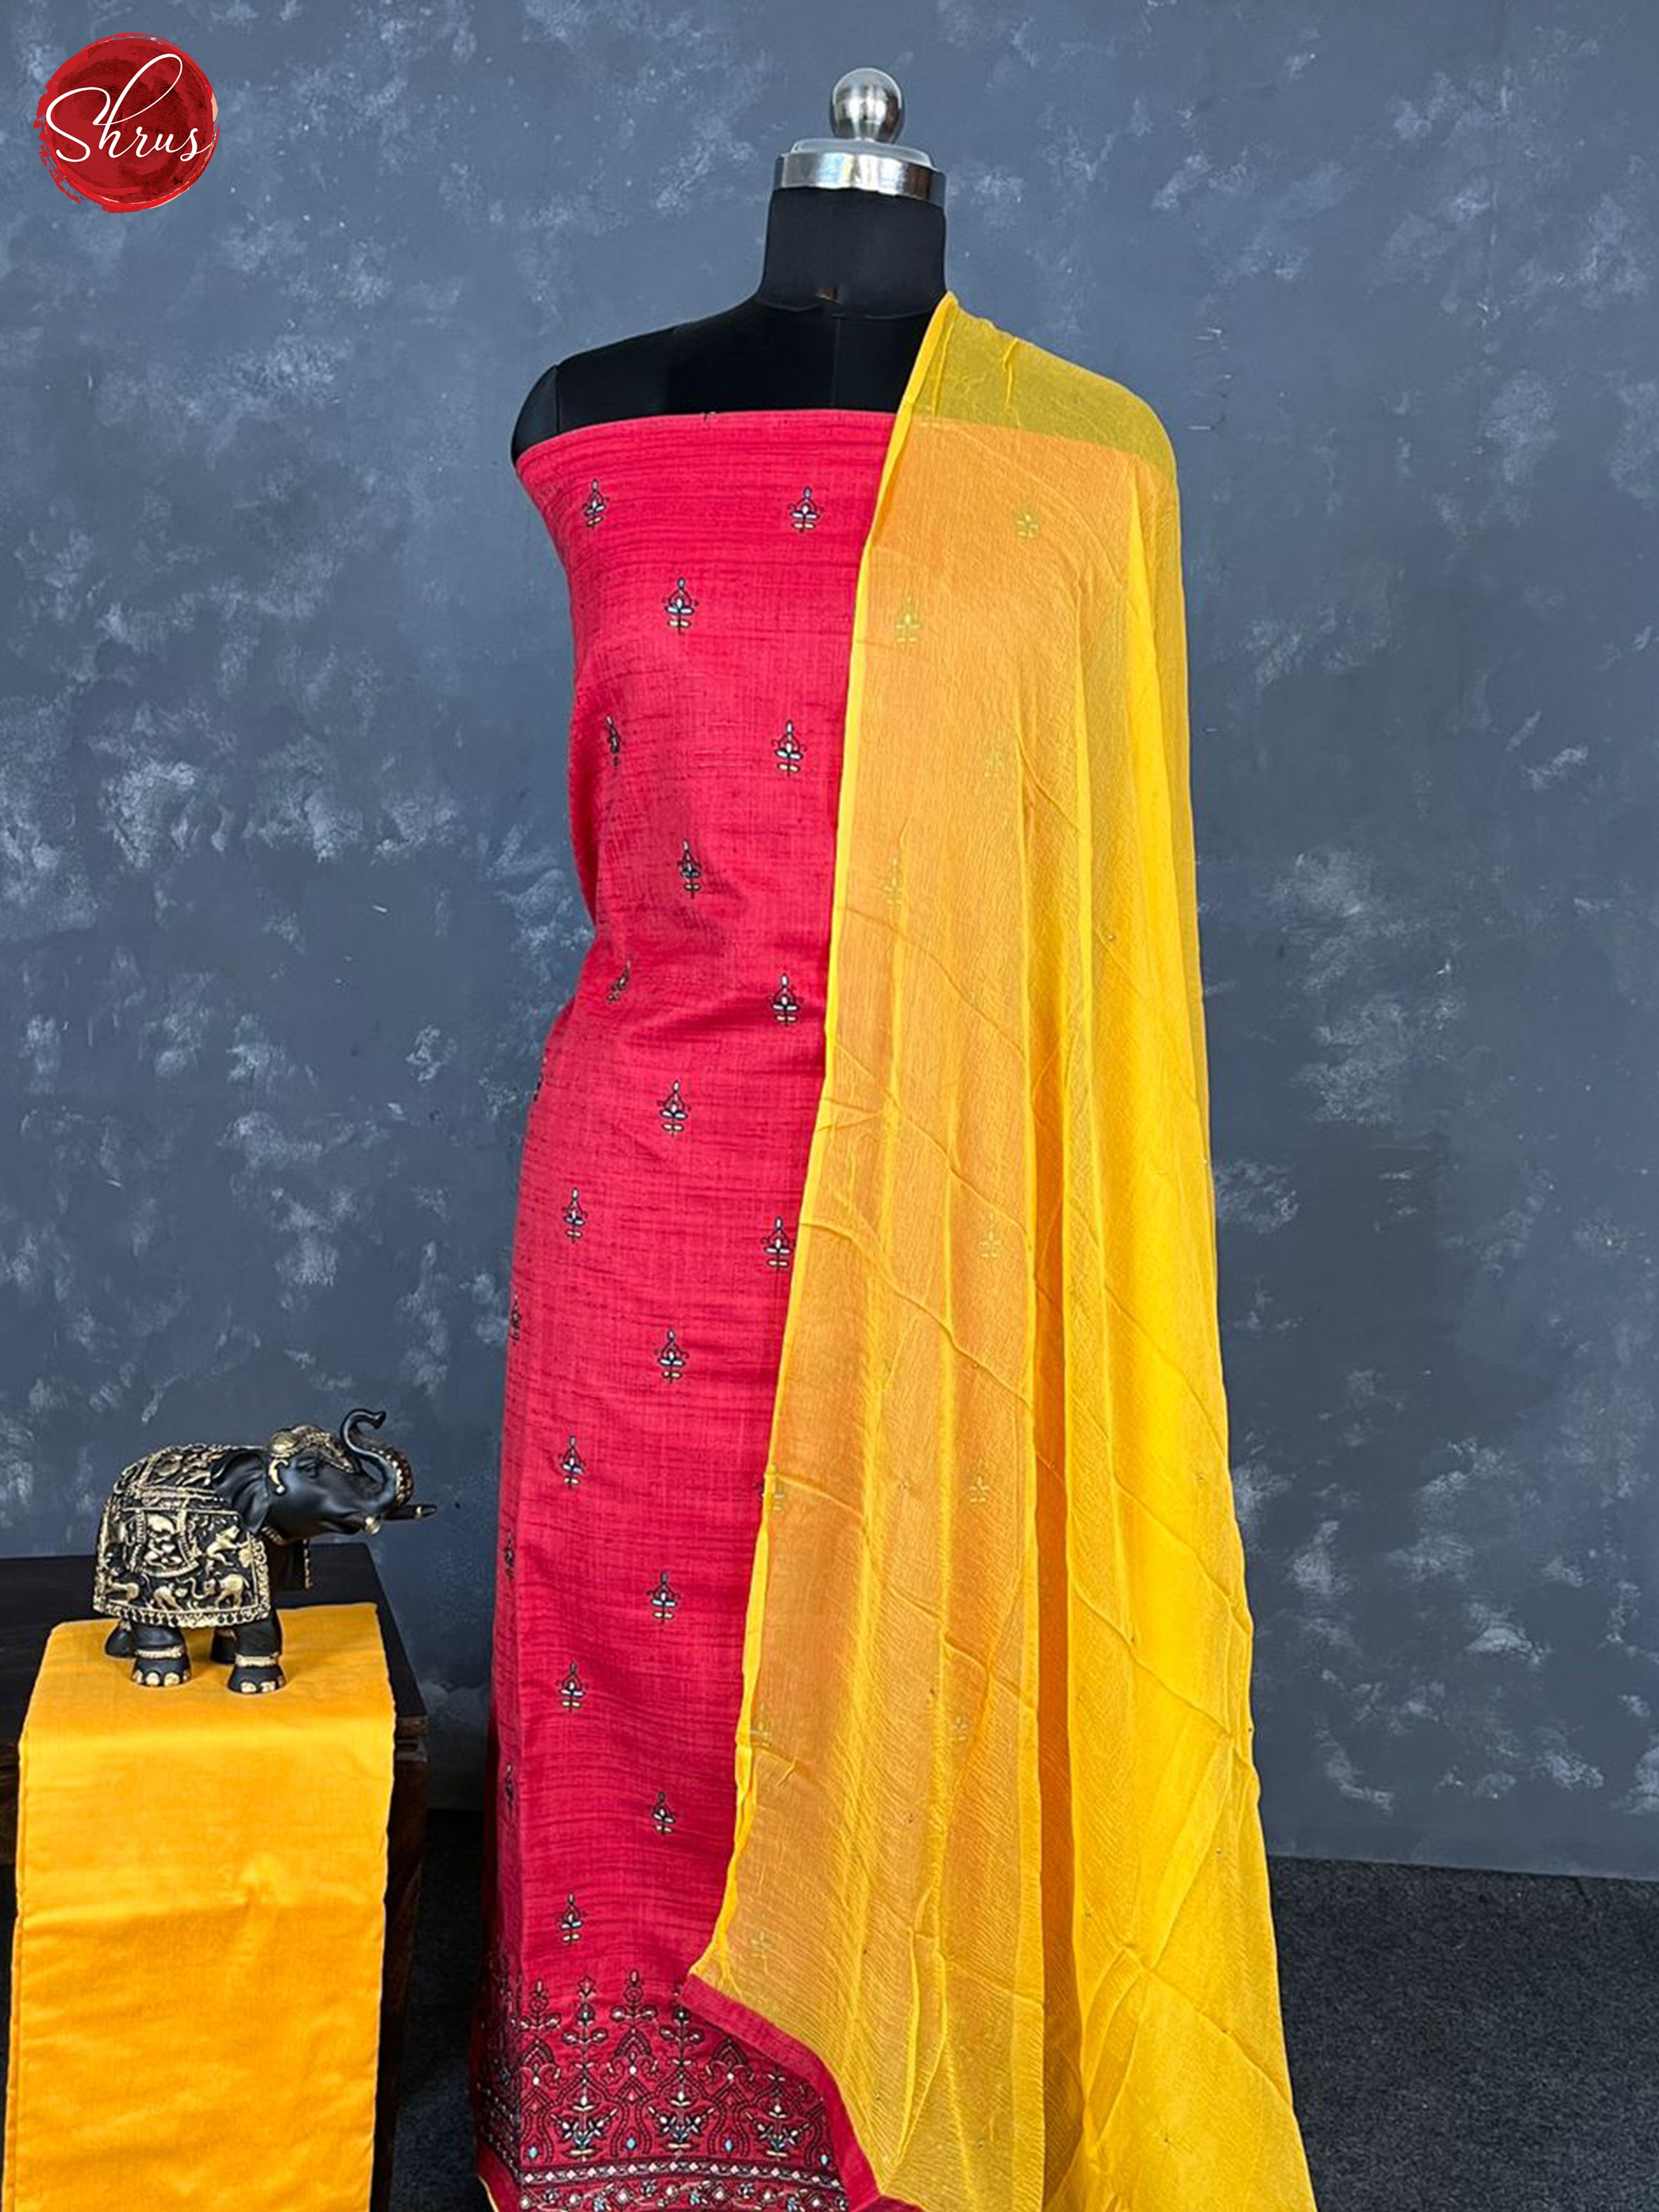 Red & Yellow - Unstitched Salwar - Shop on ShrusEternity.com